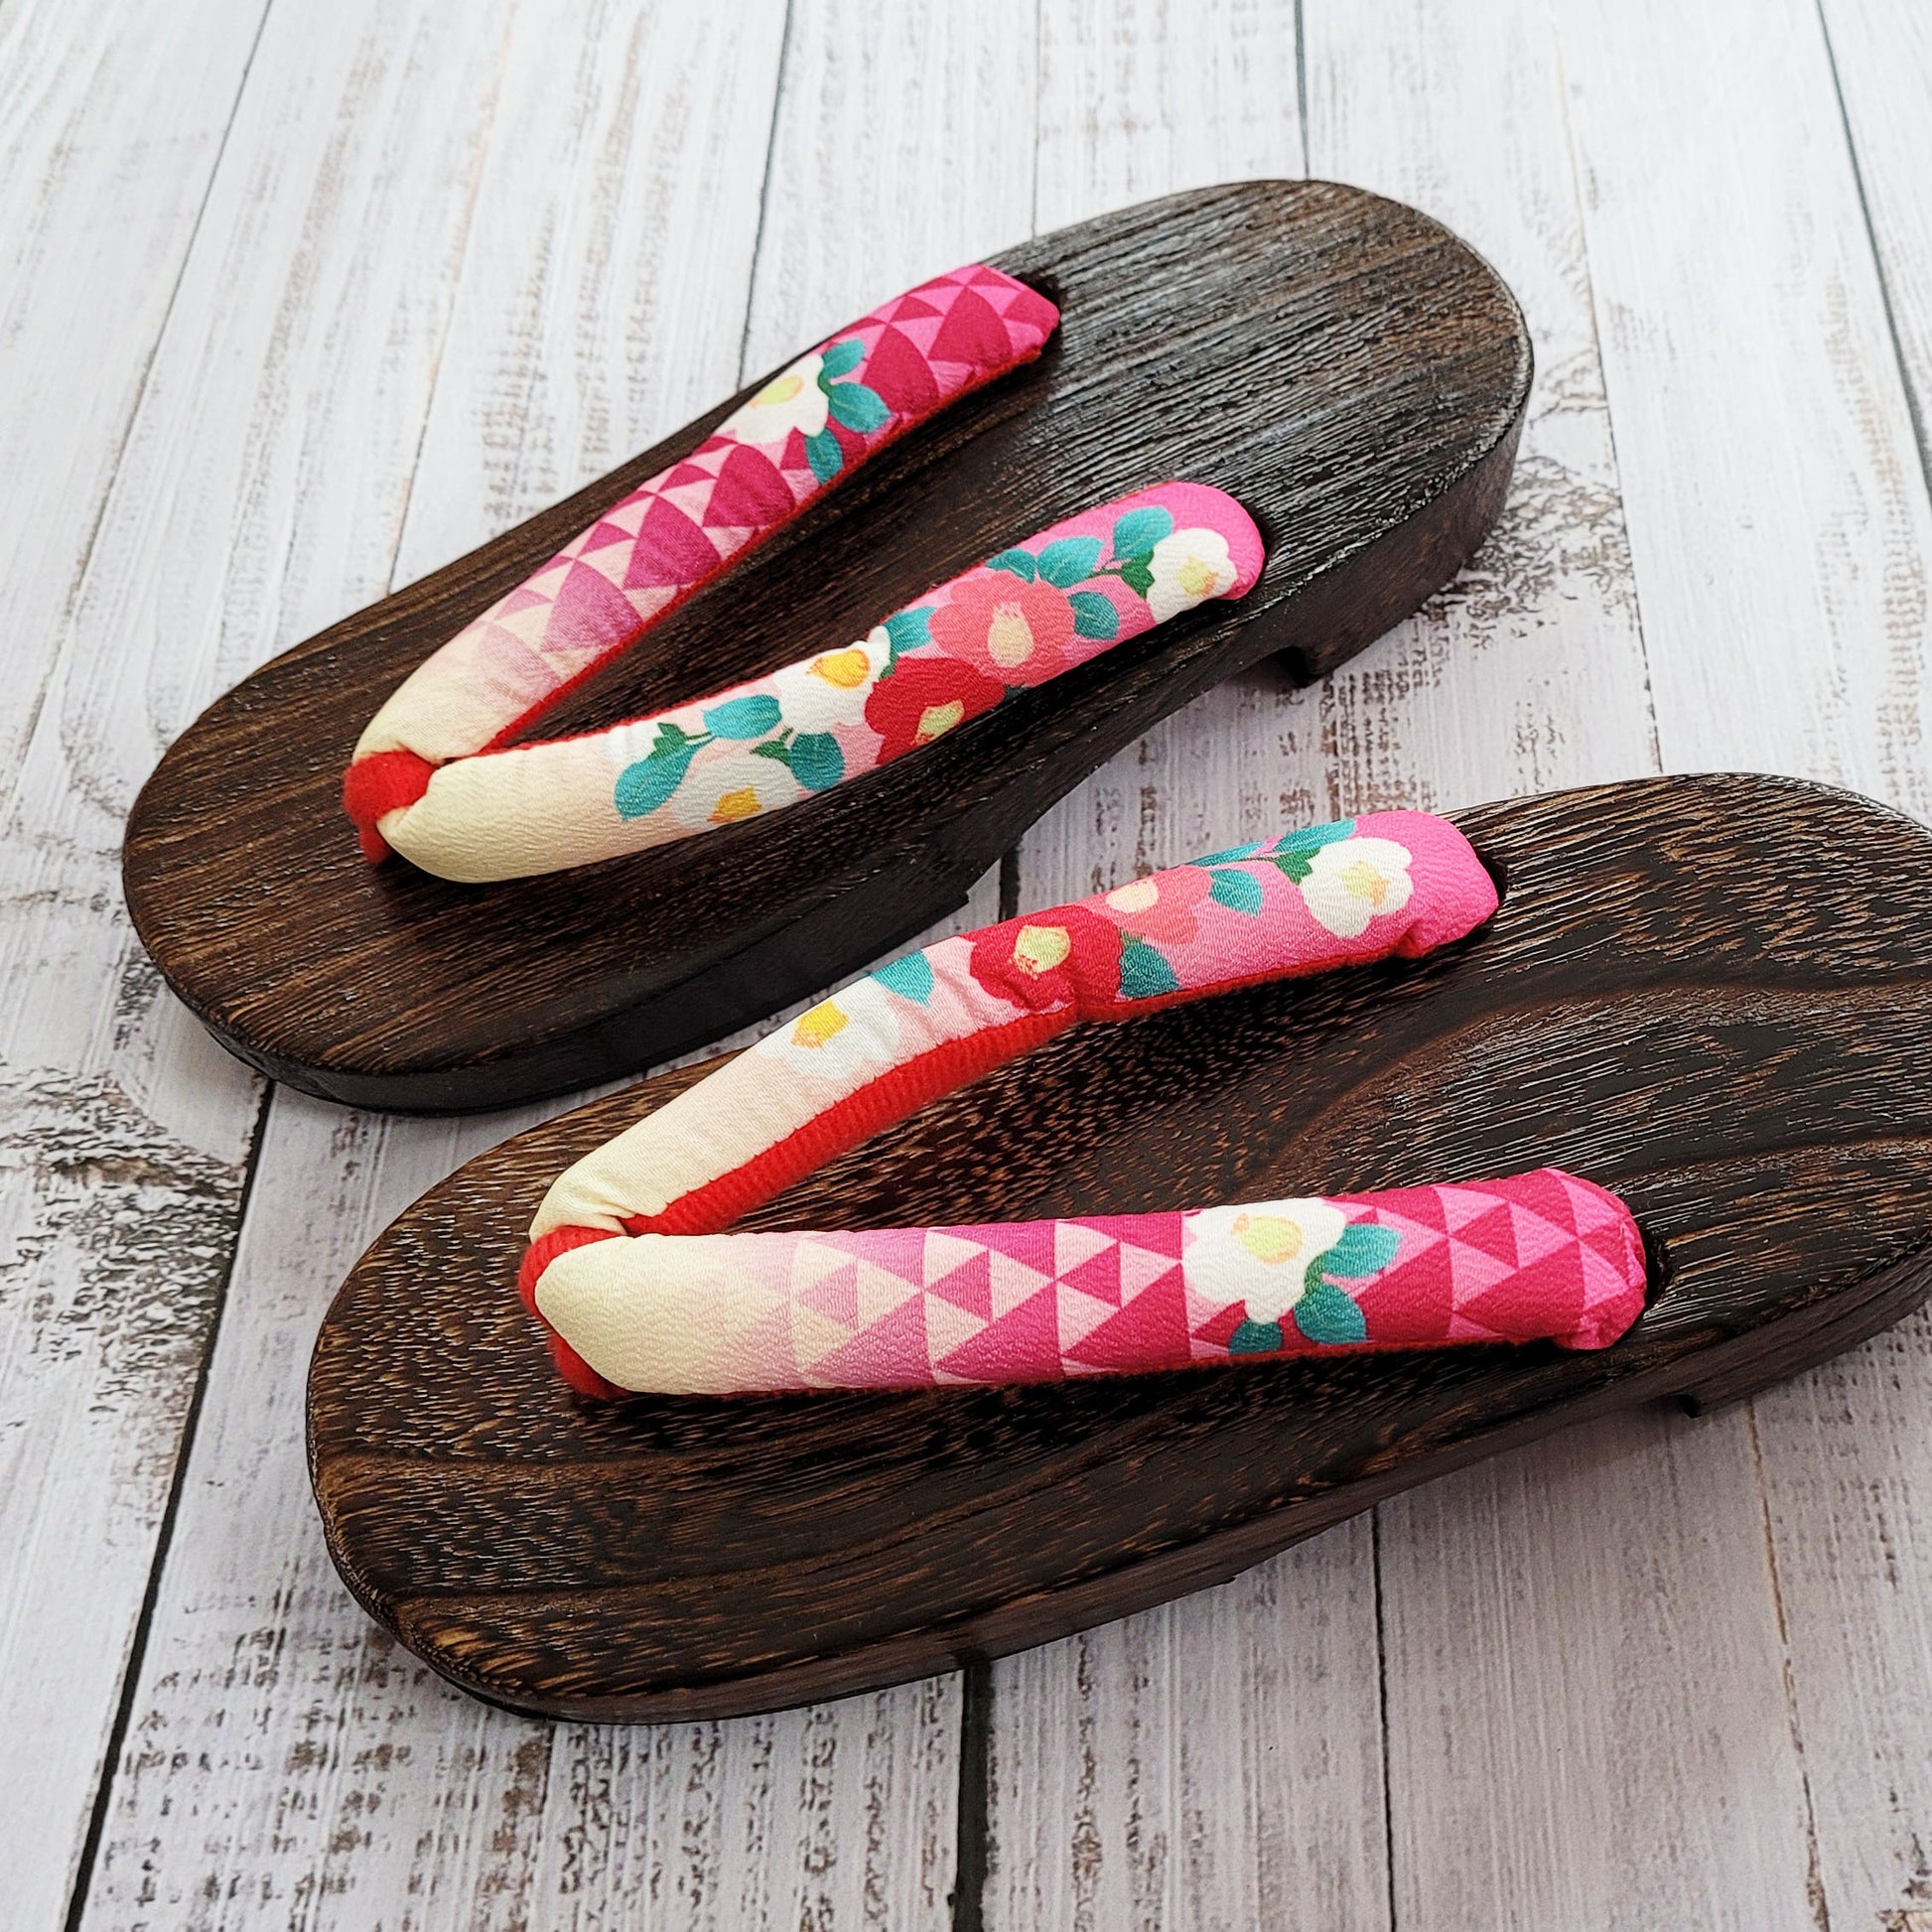 Japanese Geta Shoes in Pink with Camellia Flowers